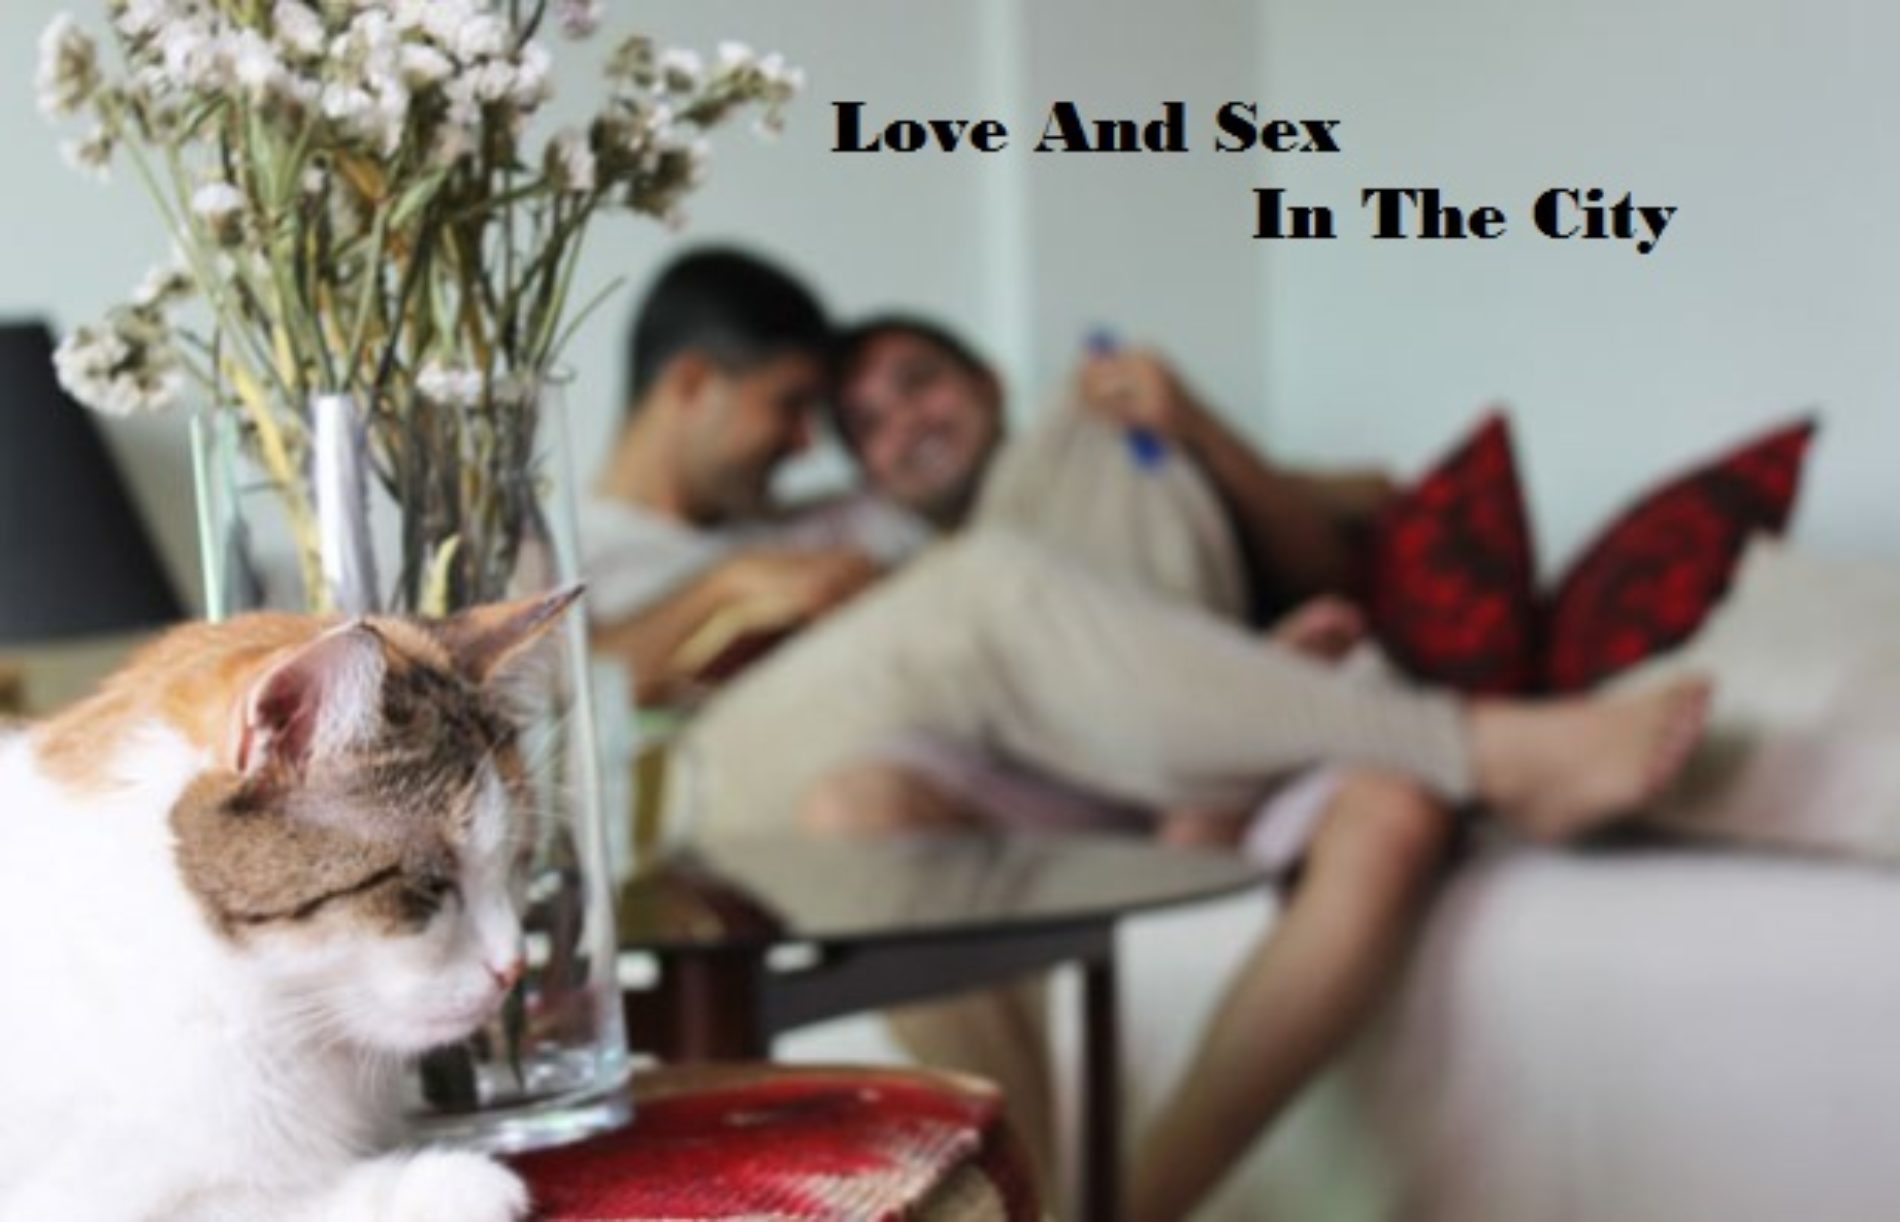 LOVE AND SEX IN THE CITY (Episode 51)